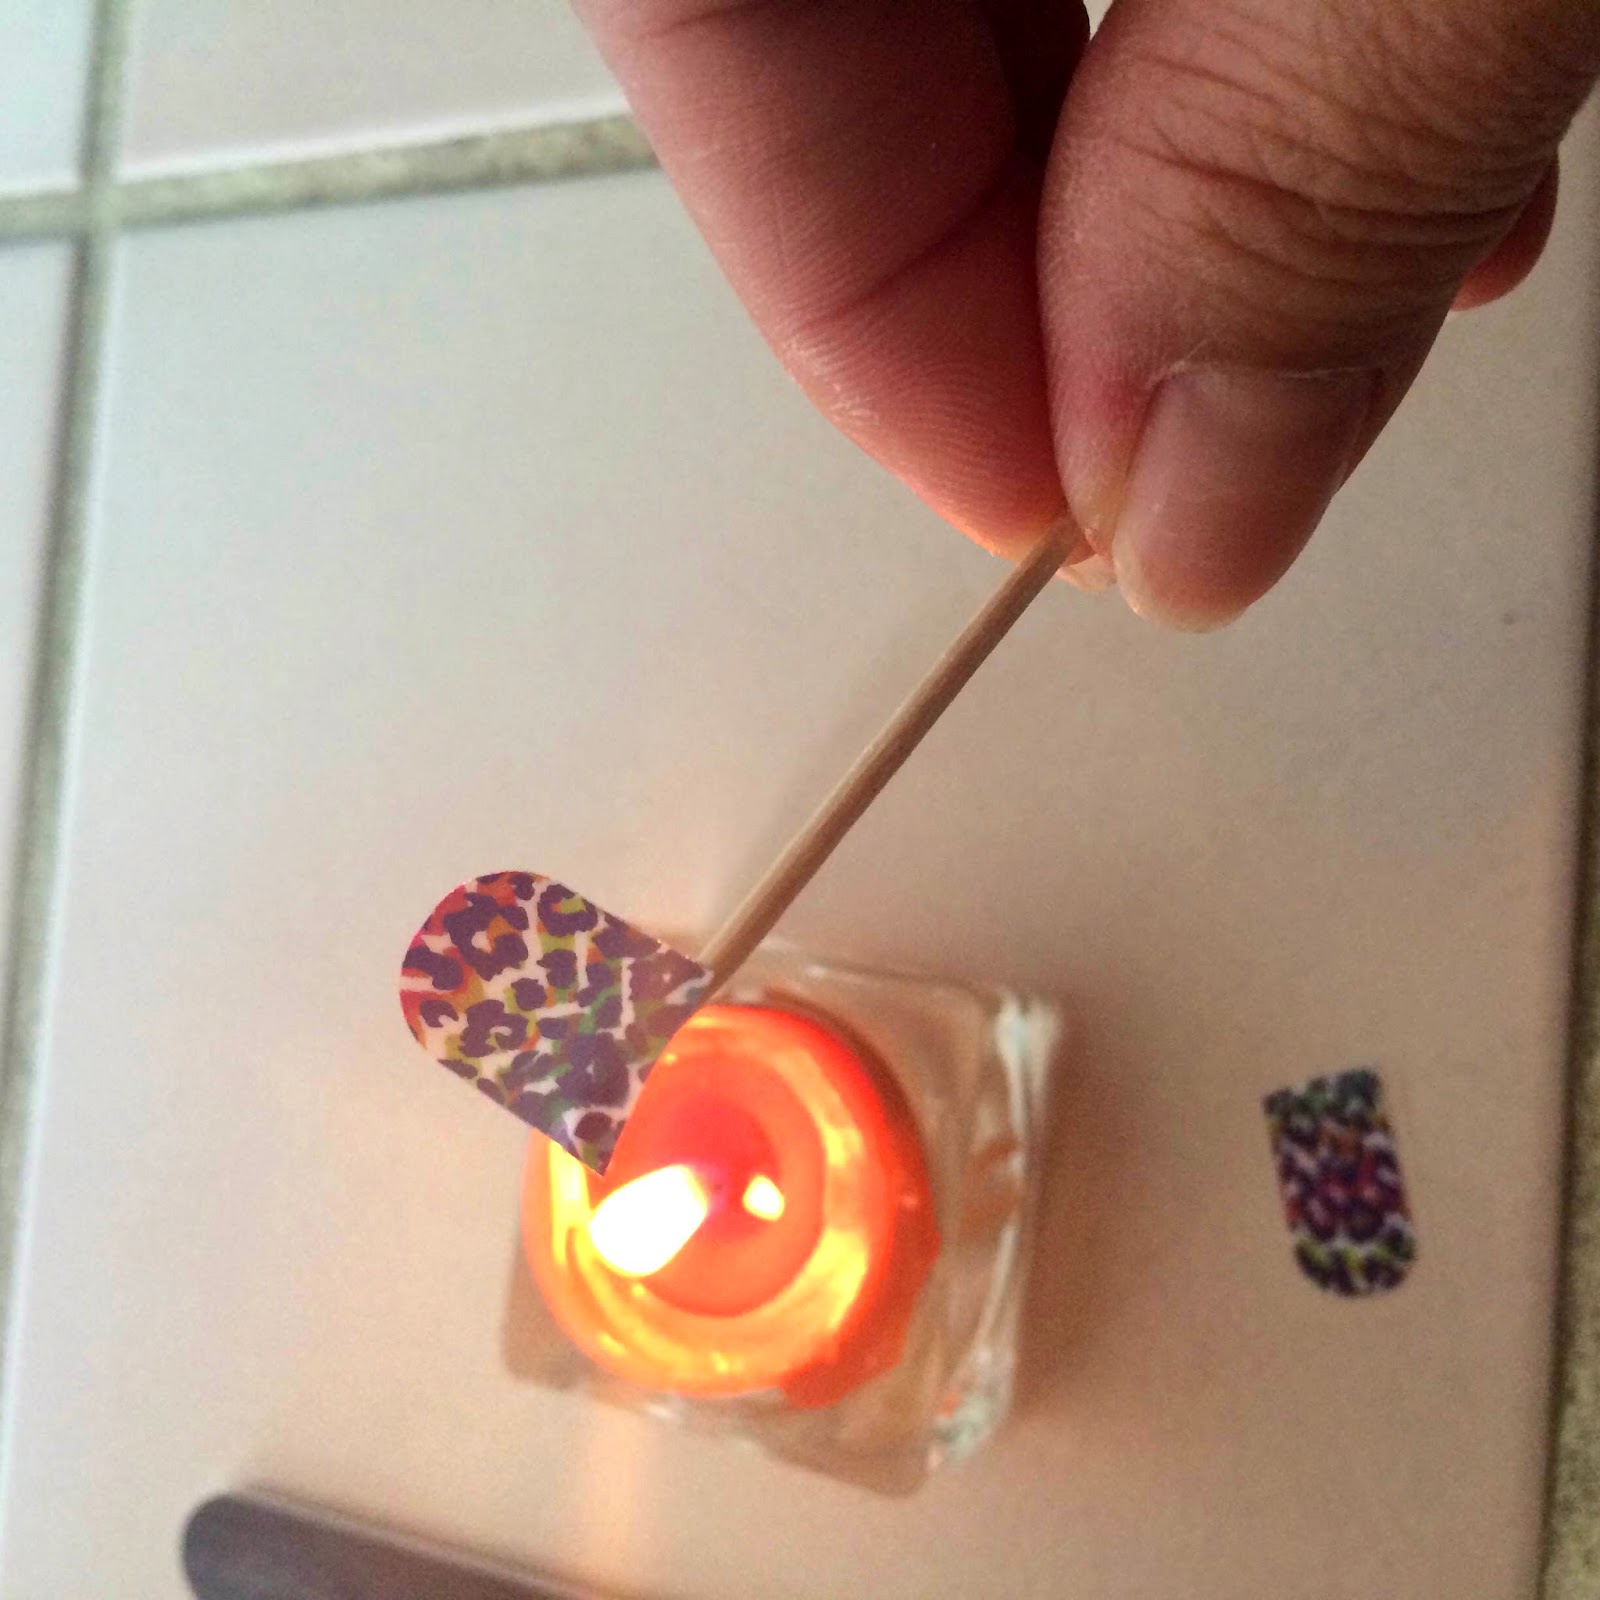 Jamberry Nails application instructions 3 transfer to toothpick or rod